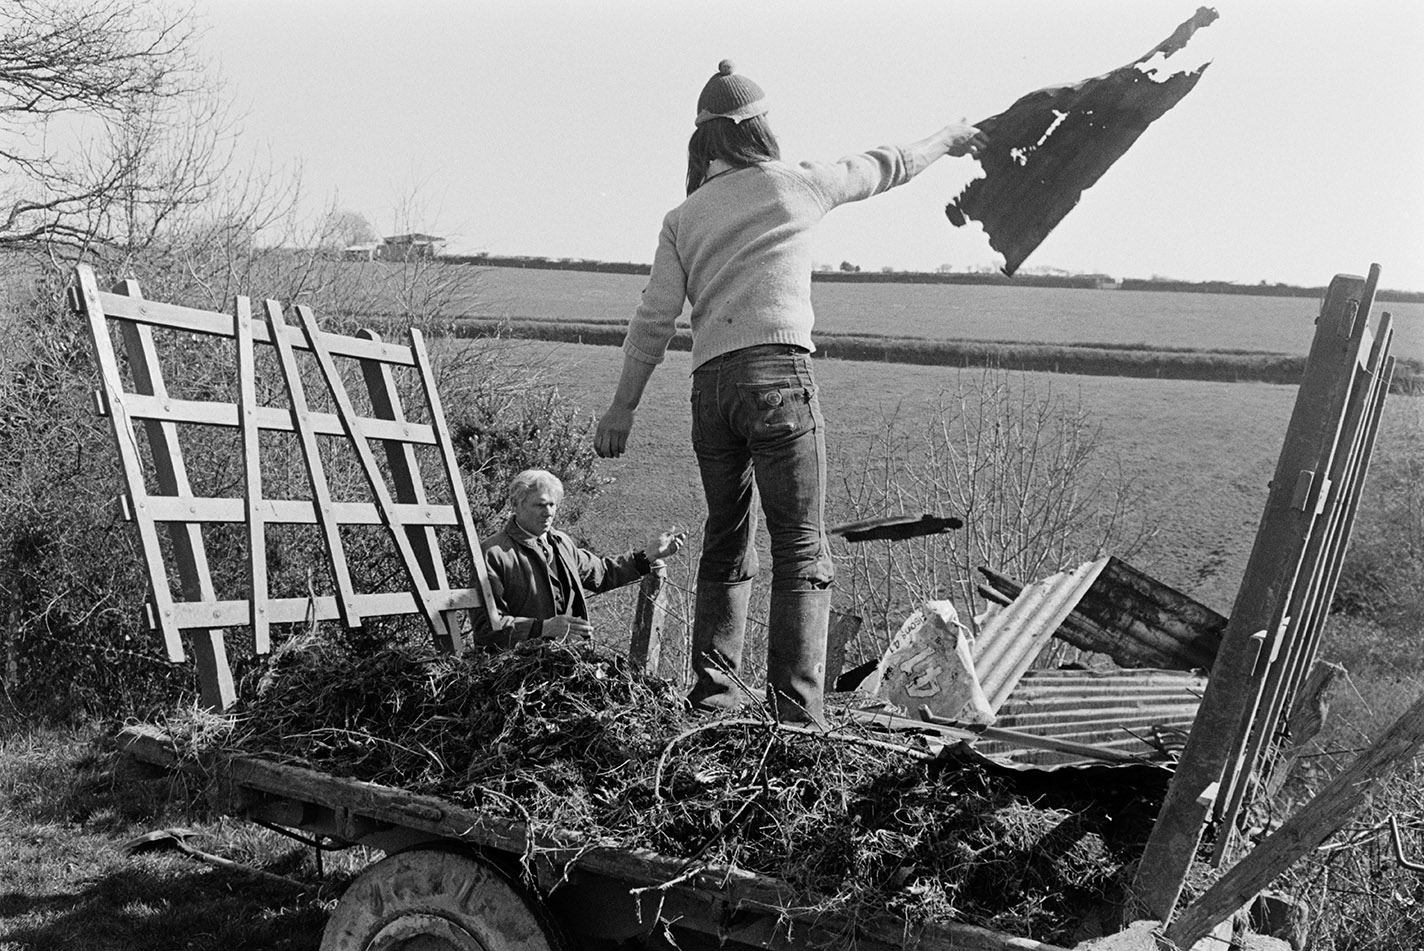 Throwing old corrugated iron sheets into field / scrubland, Beaford, March 1972